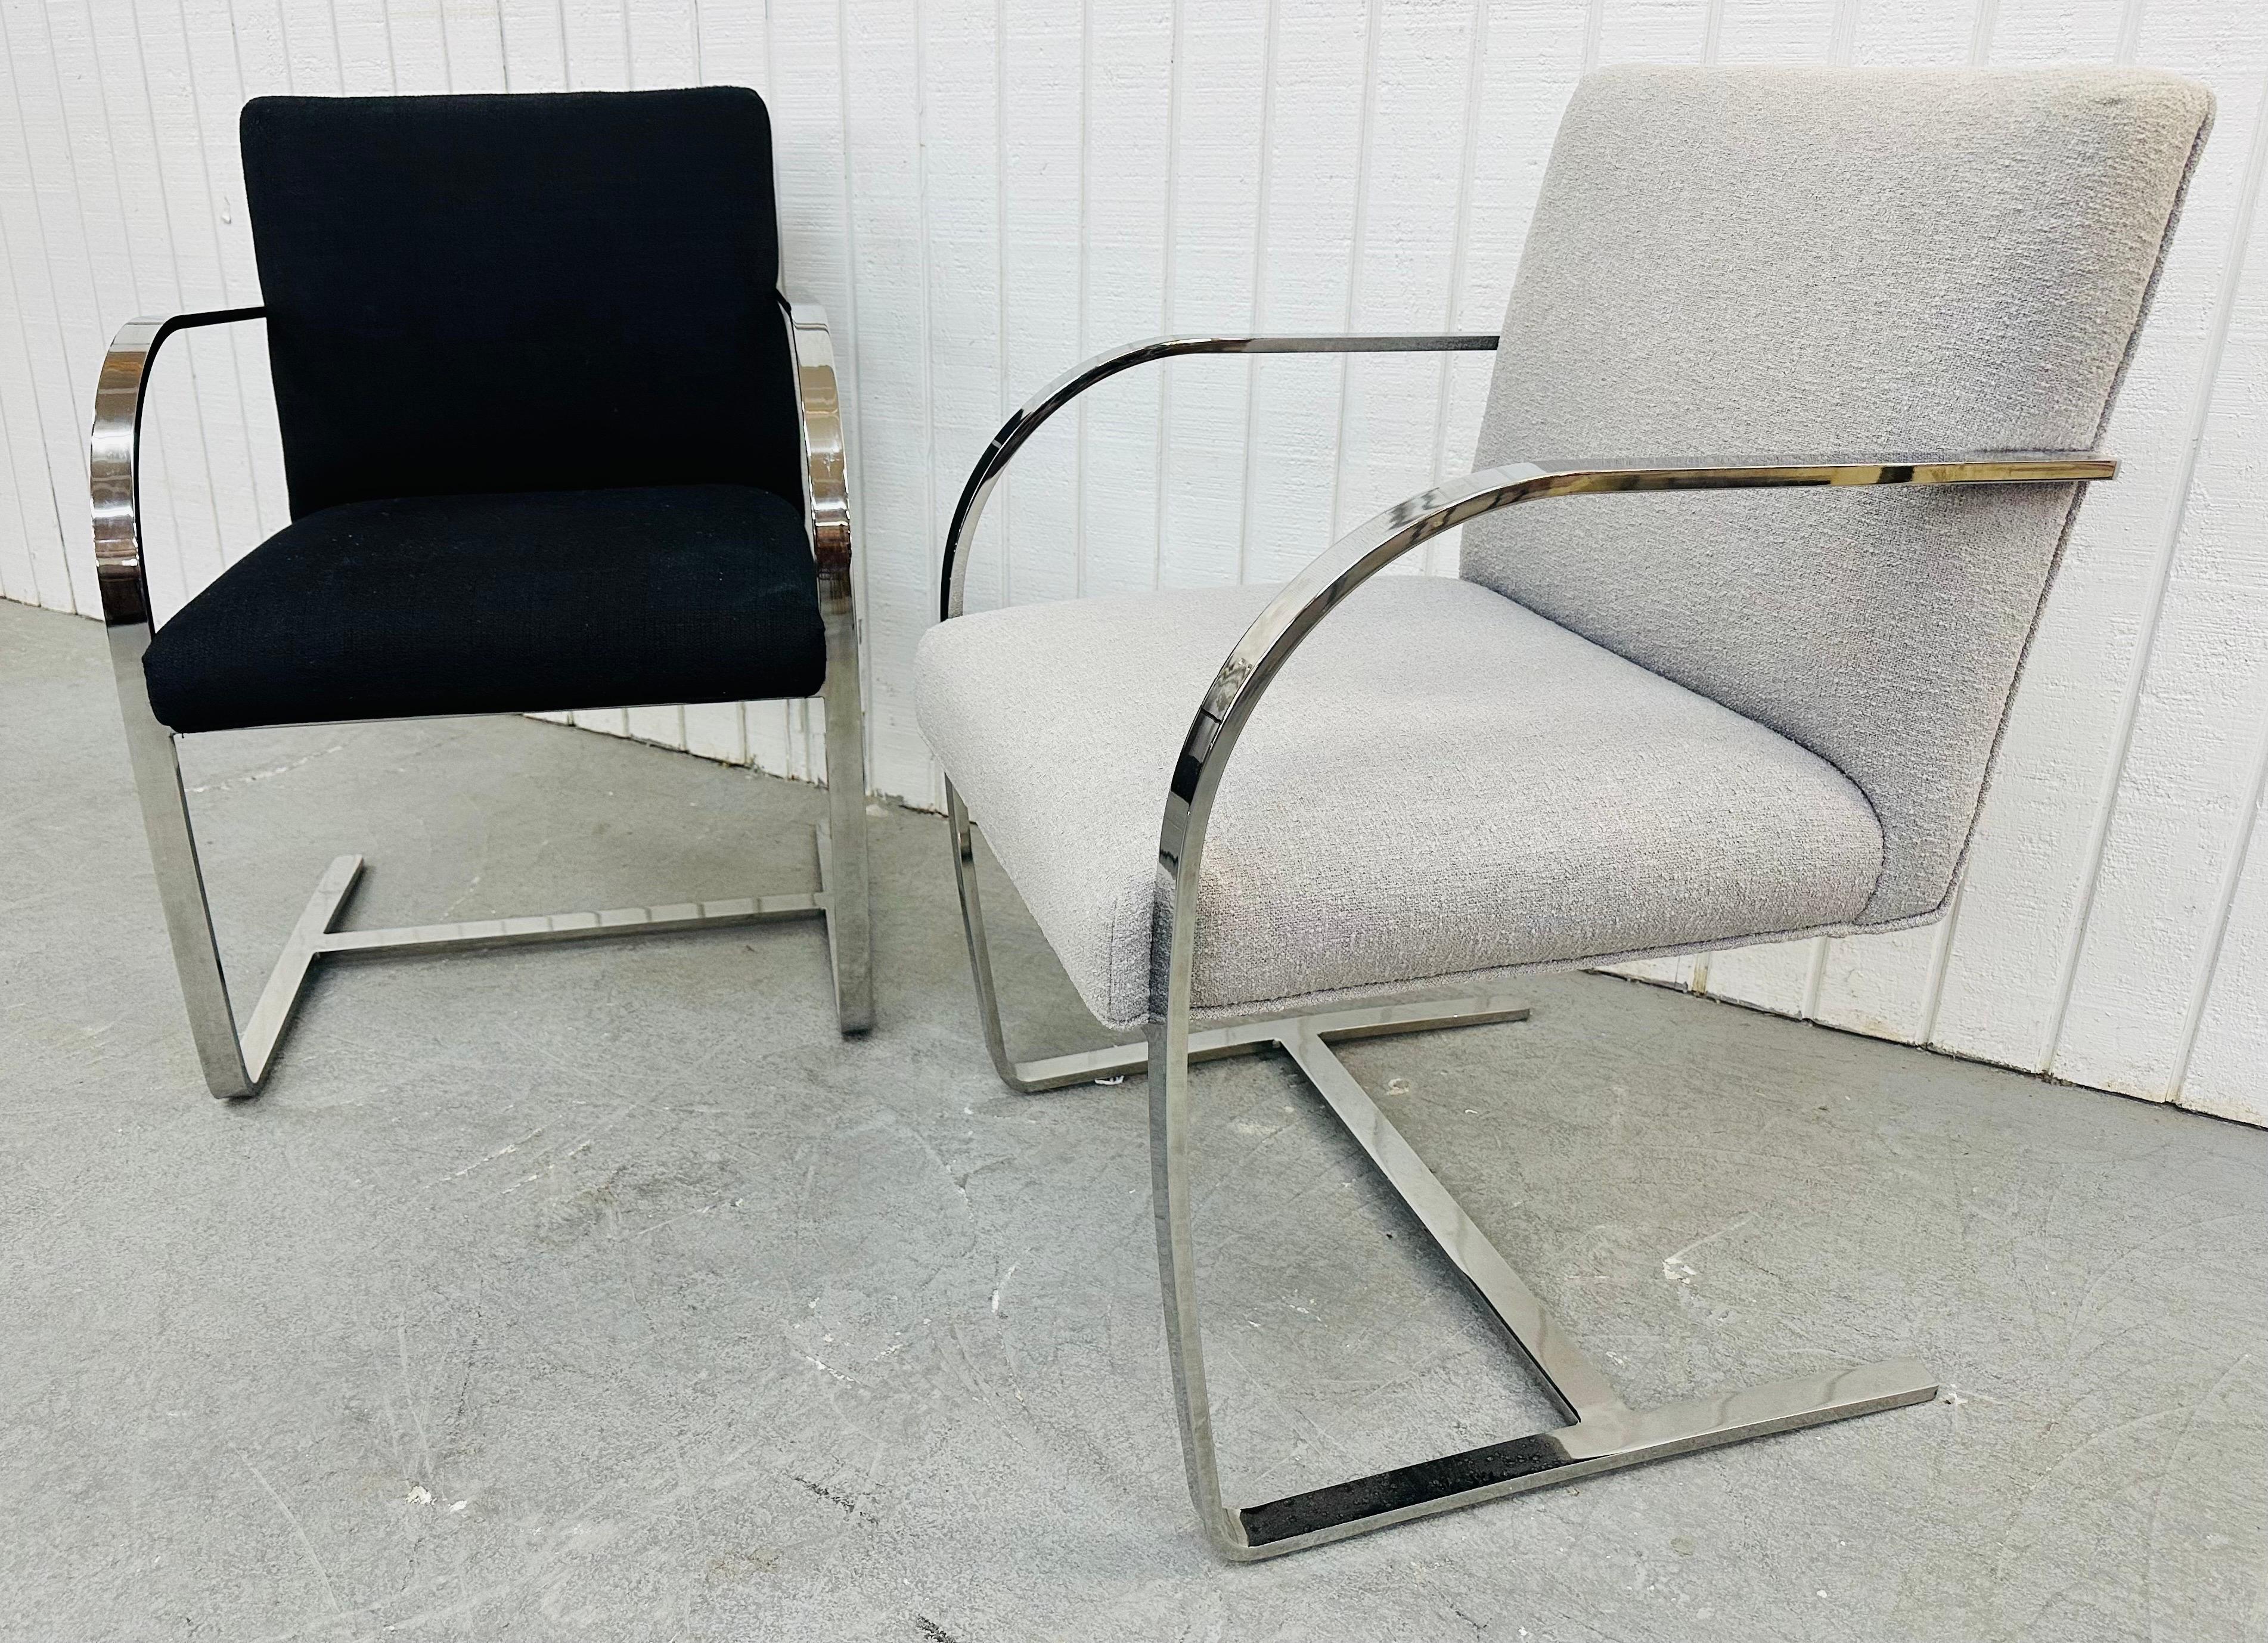 This listing is for a pair of Vintage Modern Bruno Chrome Arm Chairs. Featuring a Bruno style design, flat bar chrome frames, and black/gray upholstery body. This is an exceptional combination of quality and design!